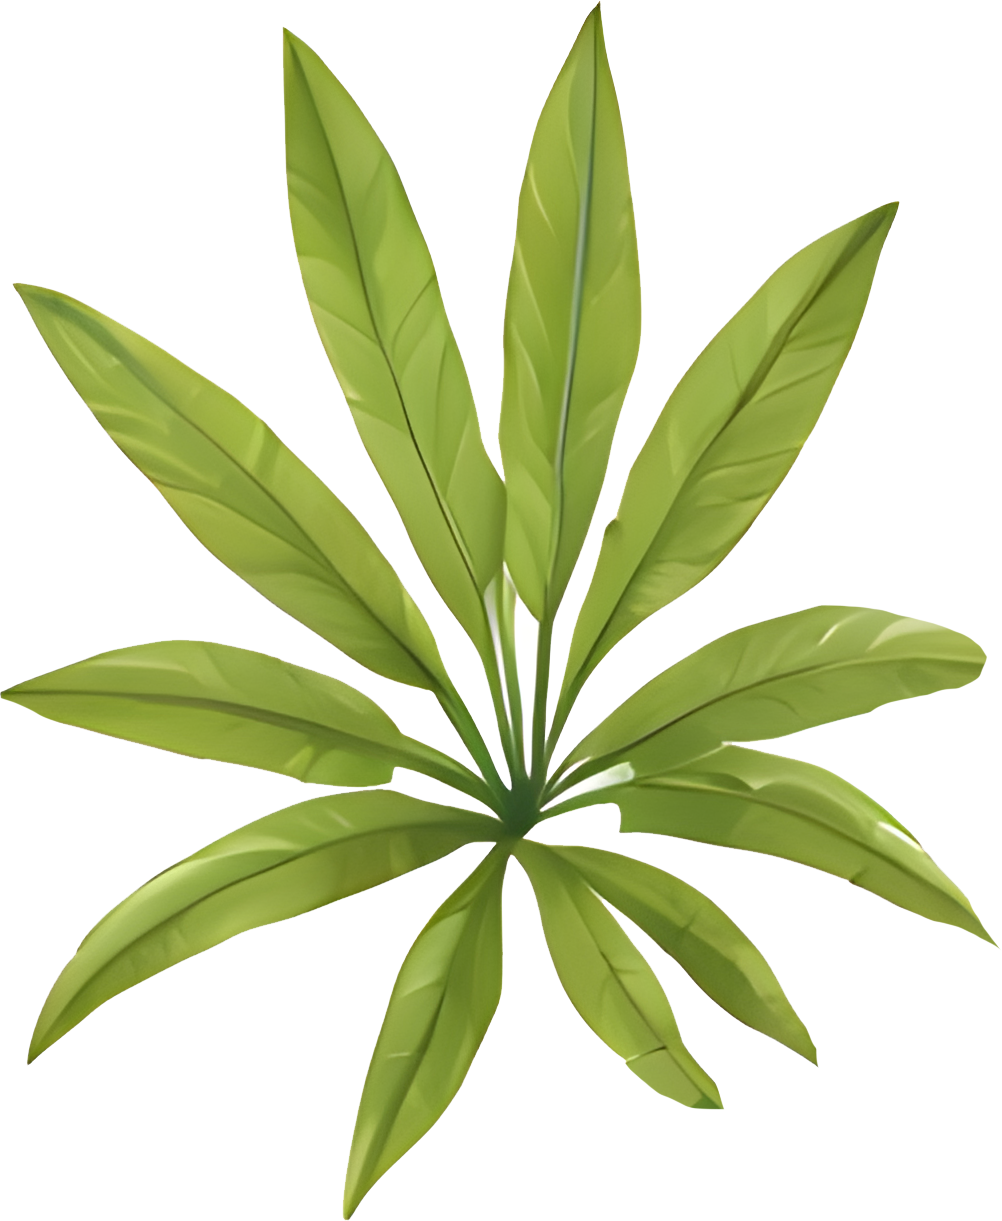 High-Res Leaf PNG Green Foliage Image, Tropical different type exotic leaves set. Jungle plants. Calathea, Monstera and different style of palm leaves_10